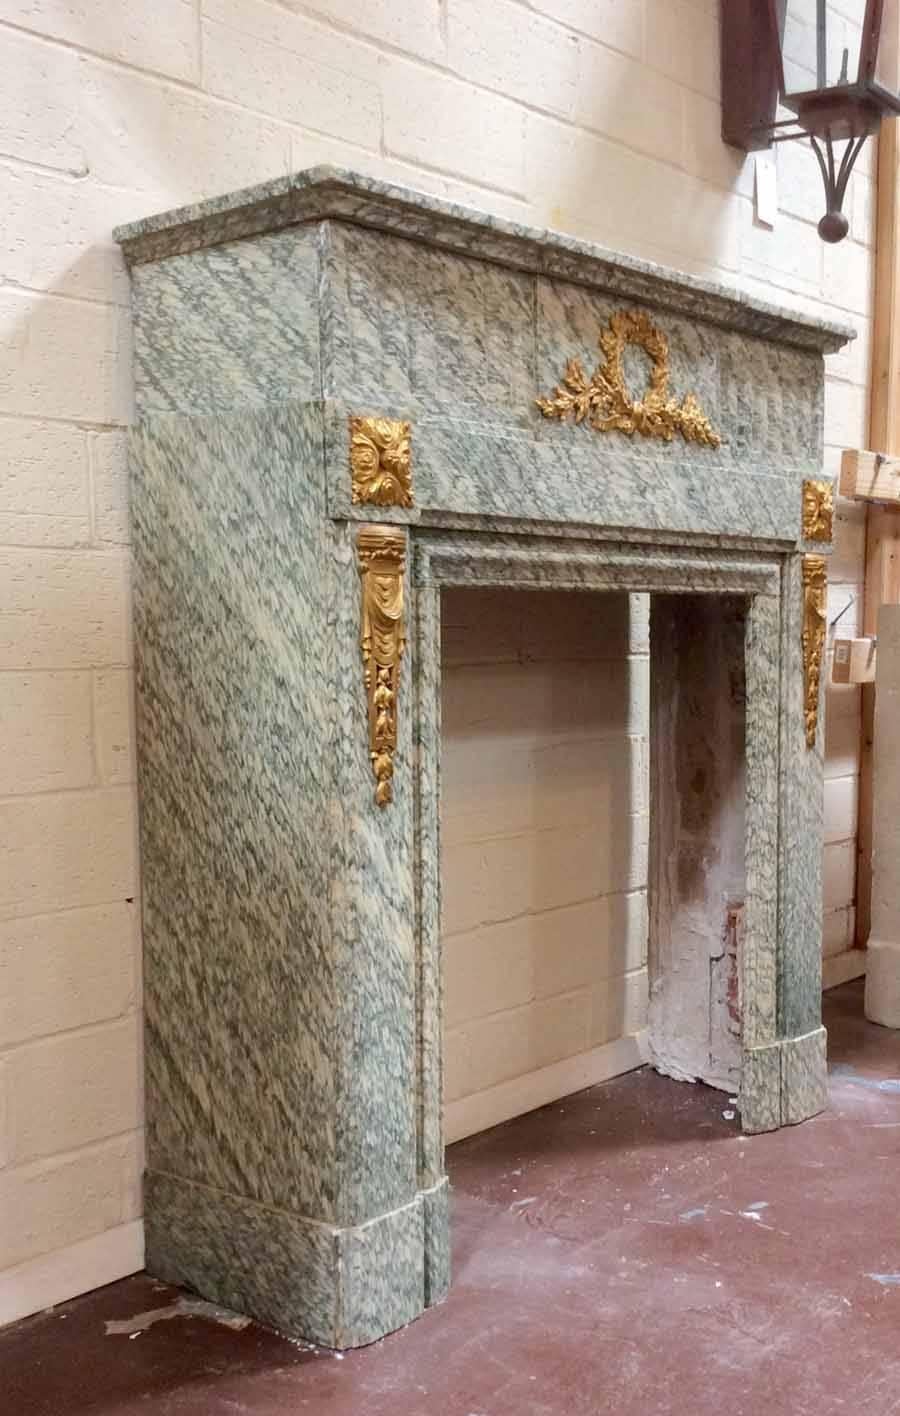 This empire marble mantel features a fluted lintel and bronze accents. Nice clean lines and wonderful movement! 

Origin: France, 

circa 1870. 

Measurements: 42 1/4